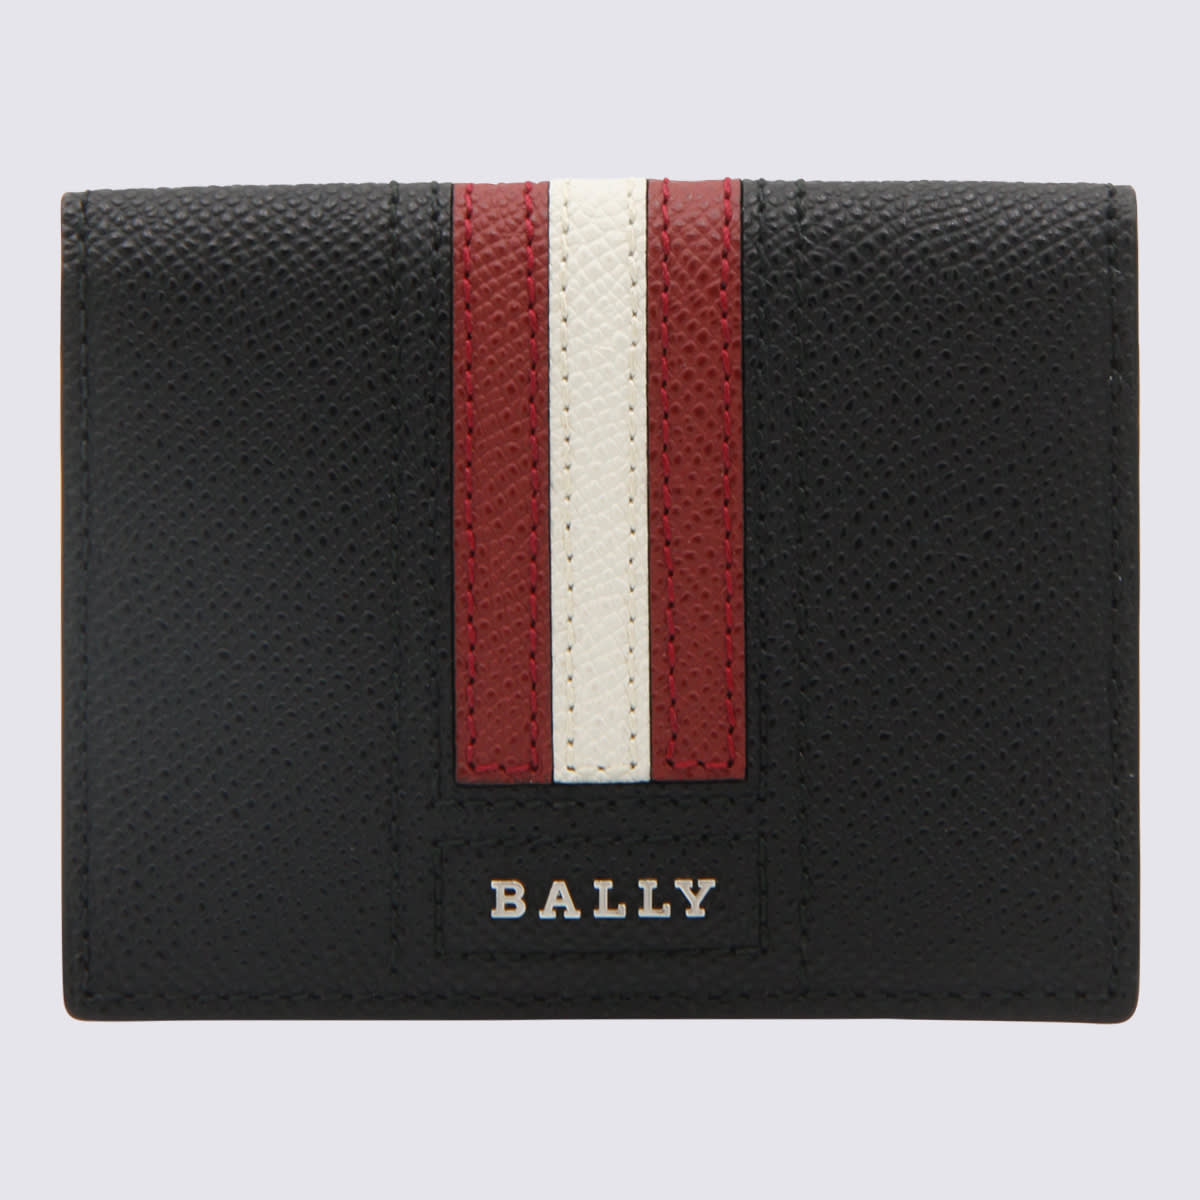 Black, White And Red Leather Wallet